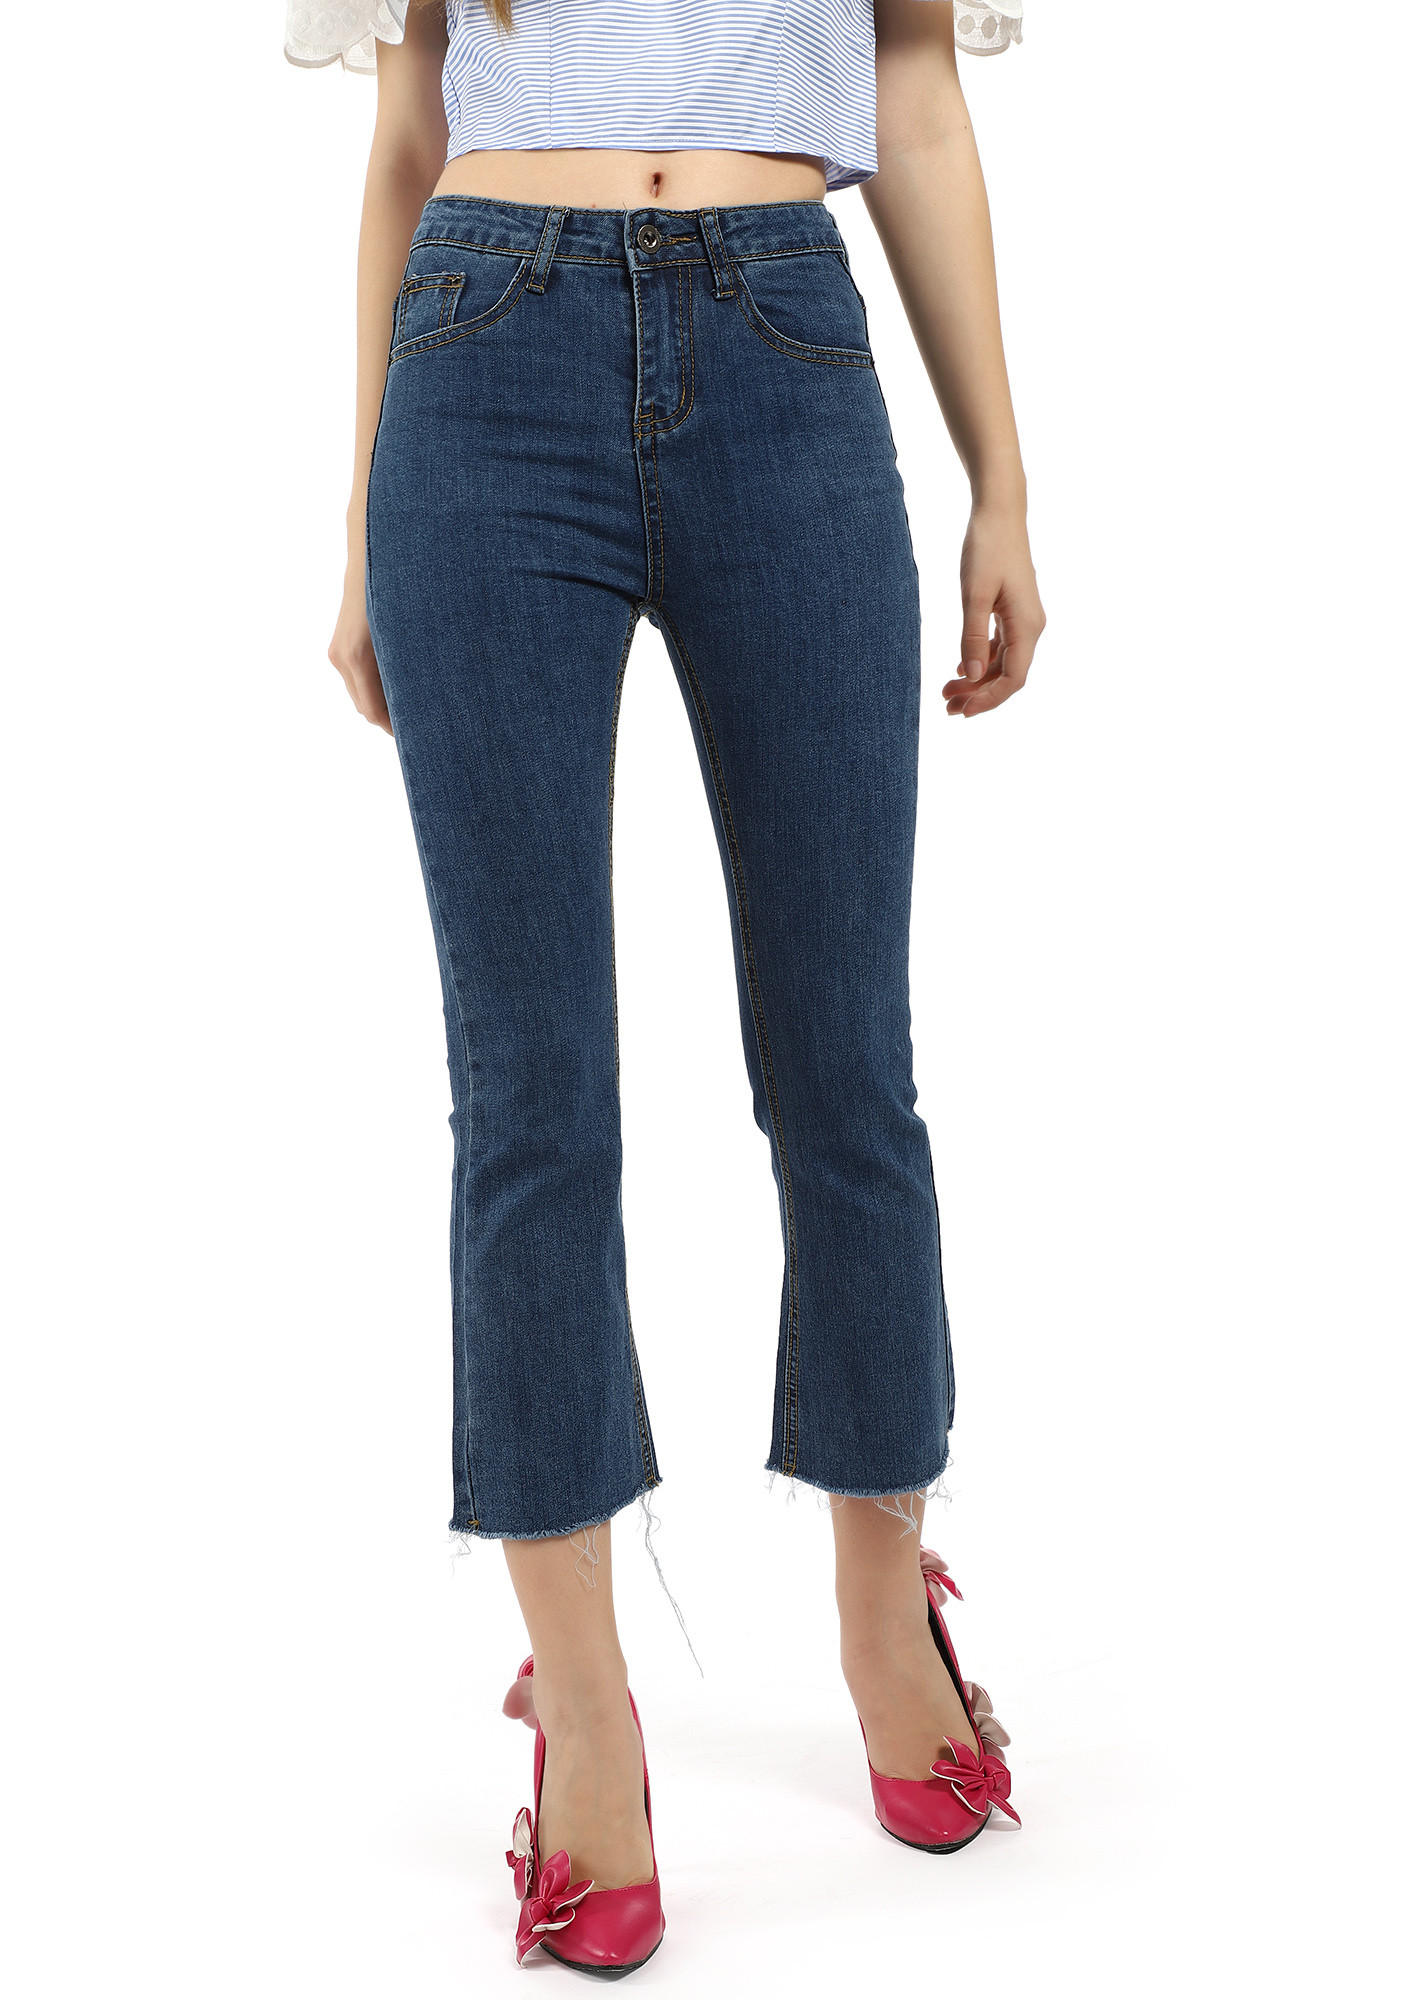 EDGE TO EDGE BLUE CROPPED JEANS